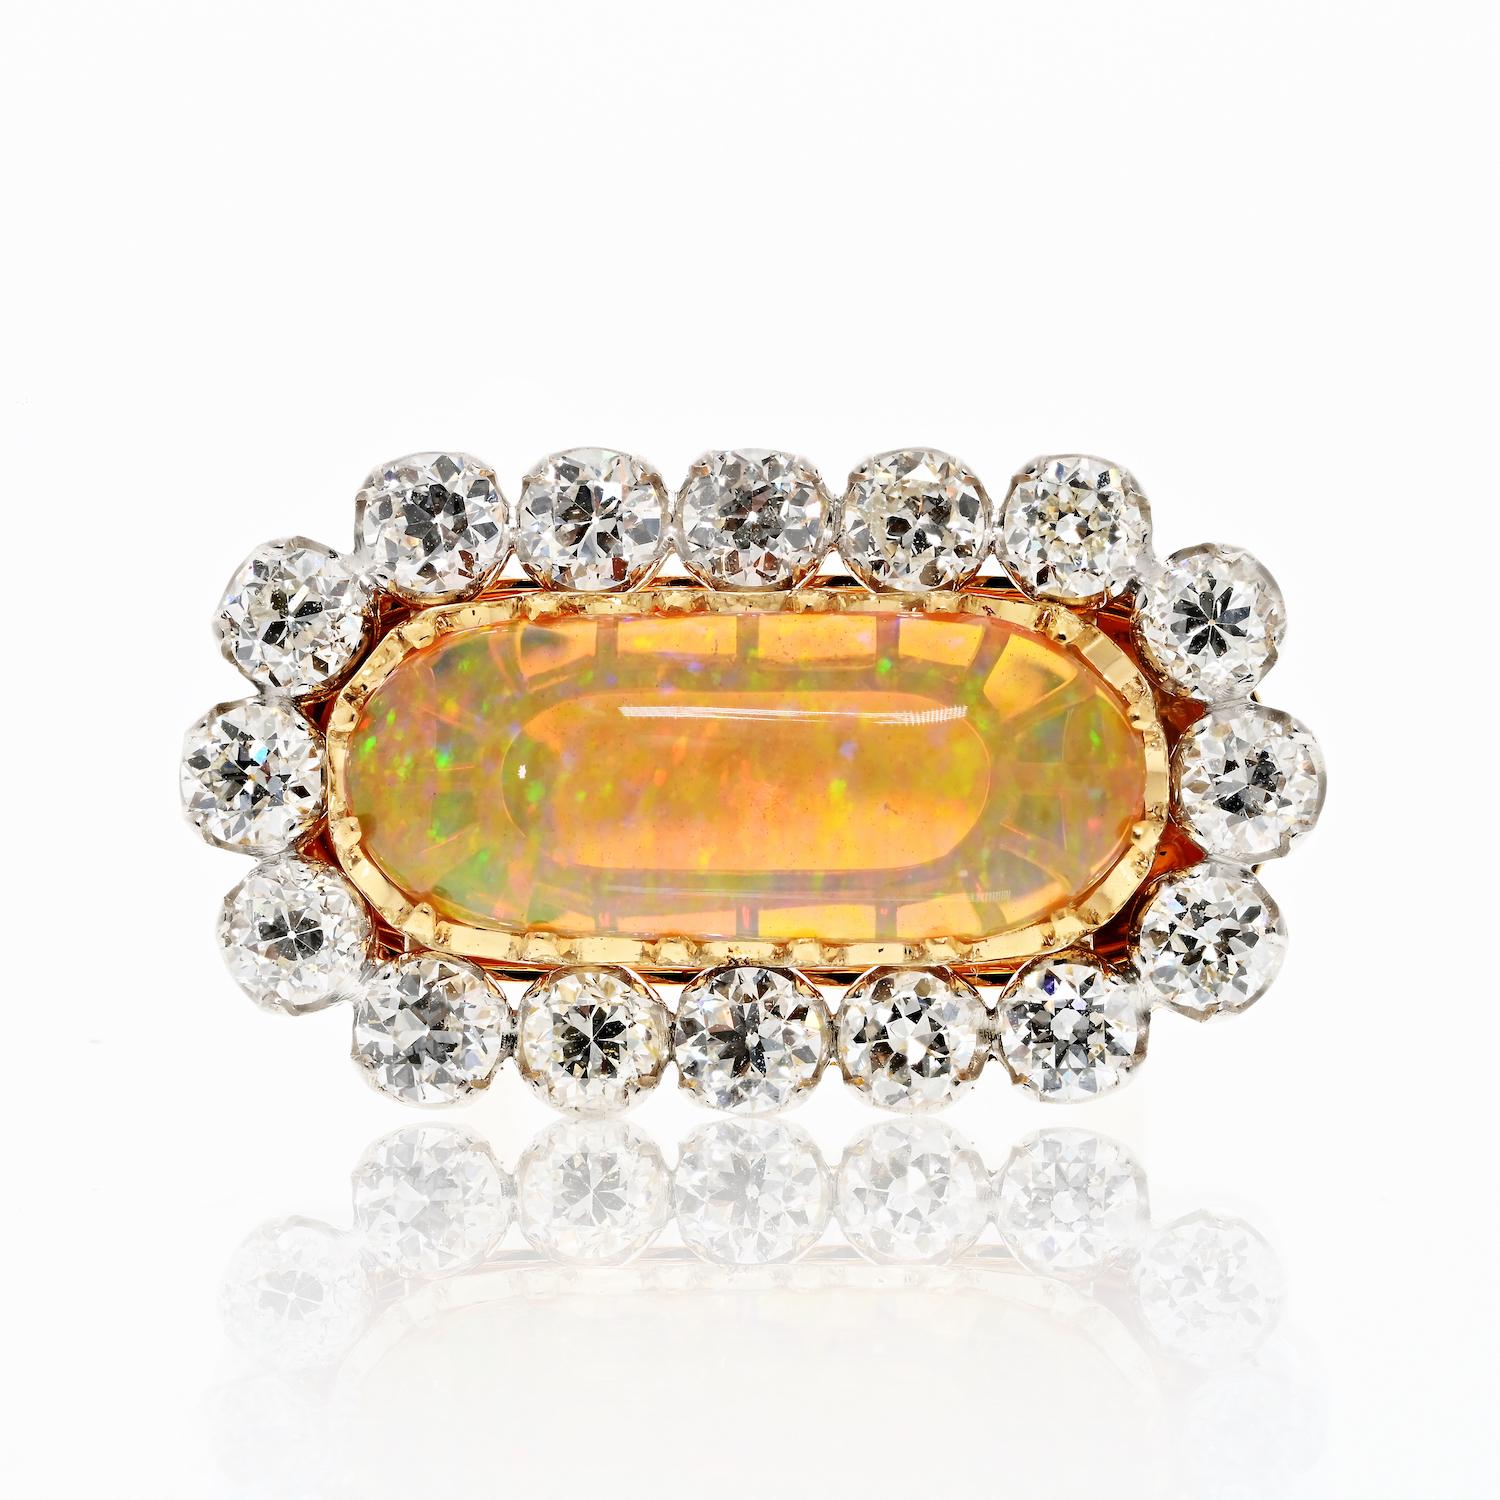 One of a Kind Opal Elegance: A Ring Beyond Compare.

Indulge in opulence with this truly exceptional one-of-a-kind ring featuring an East-West oval cabochon opal cut. This opal's fiery play of colors, set against the rich warmth of 18k yellow gold,